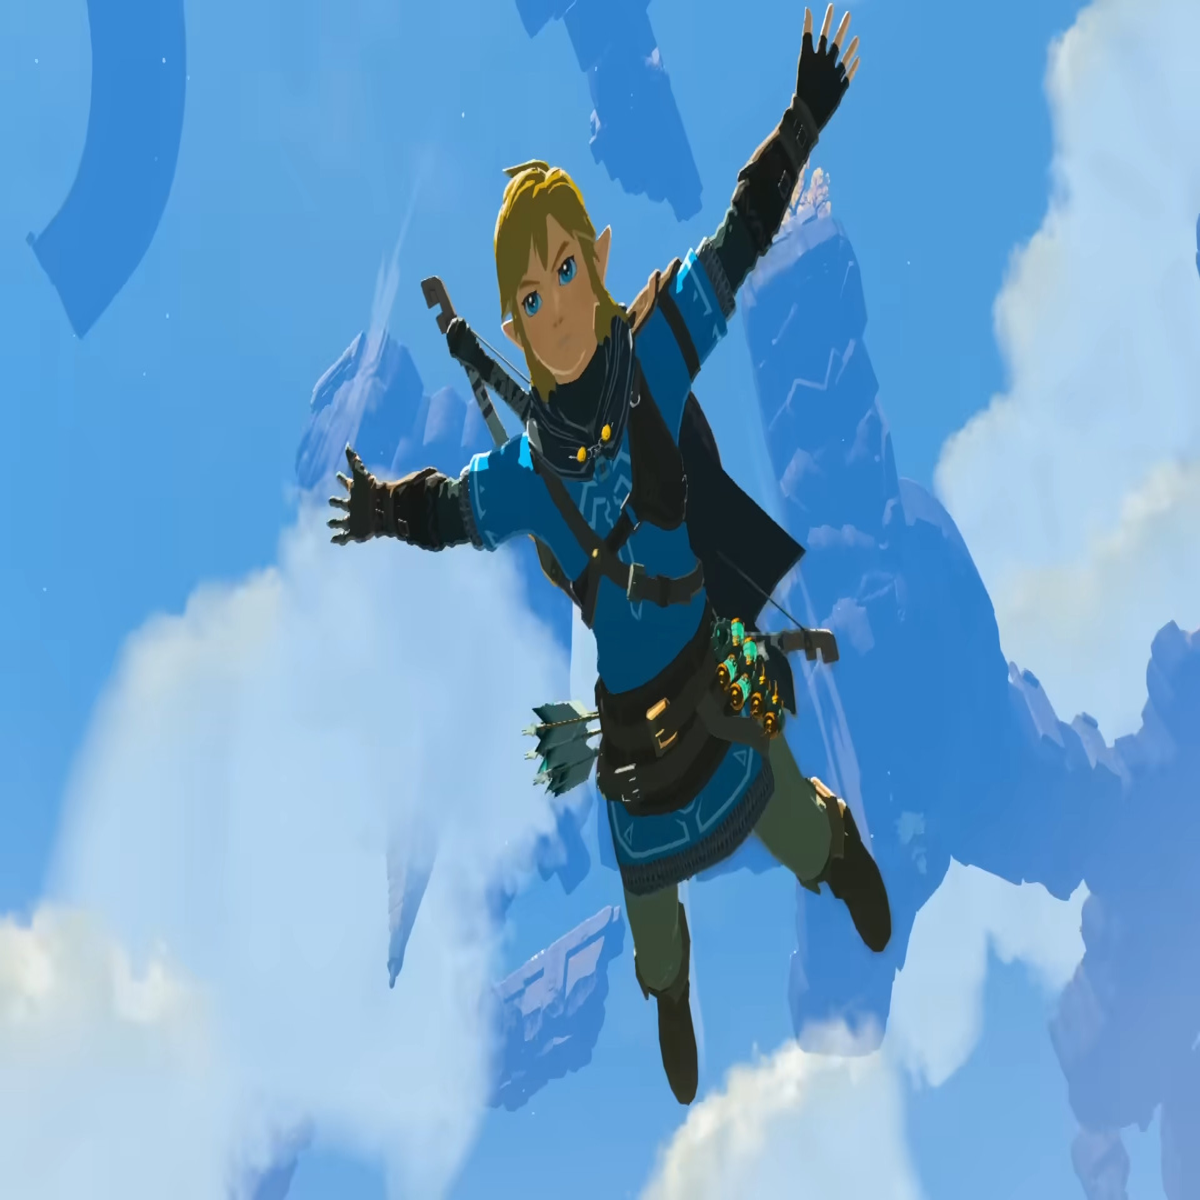 The Legend of Zelda Breath of the Wild Metacritic score and why I